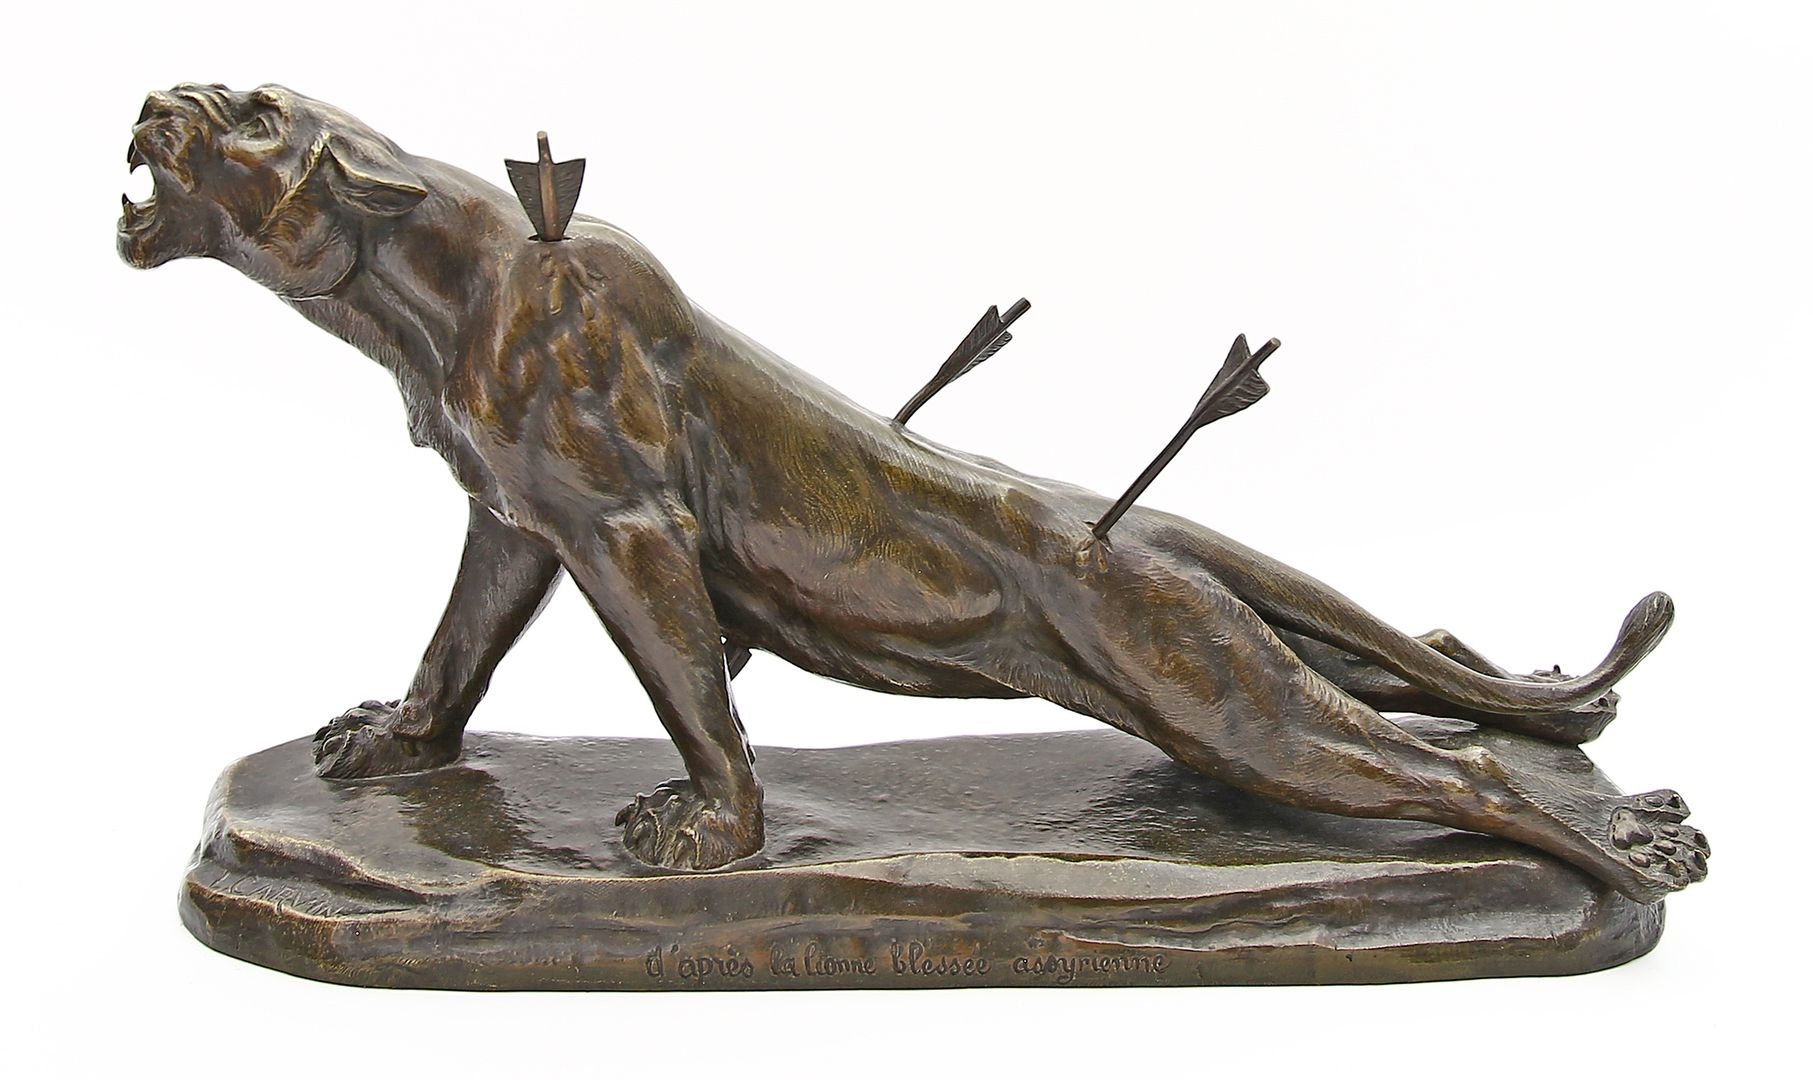 Artwork by Louis Carvin, Verwundete Löwin, Made of bronze with patina